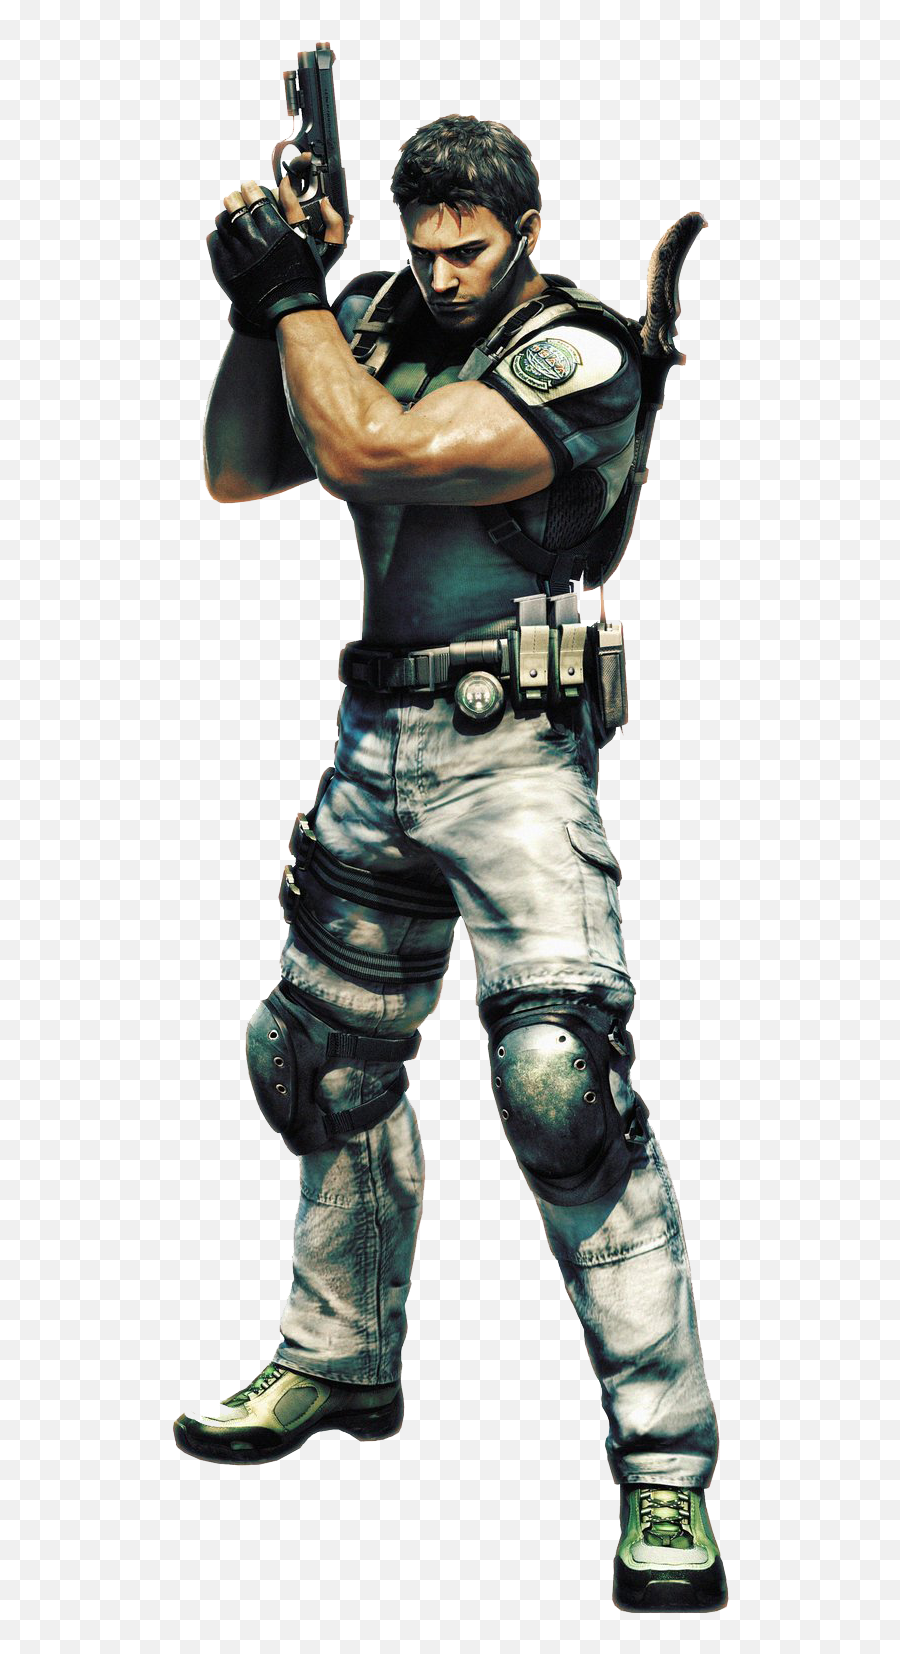 Png Resident Evil 1 Image - Chris Redfield Resident Evil 5,Resident Evil Png